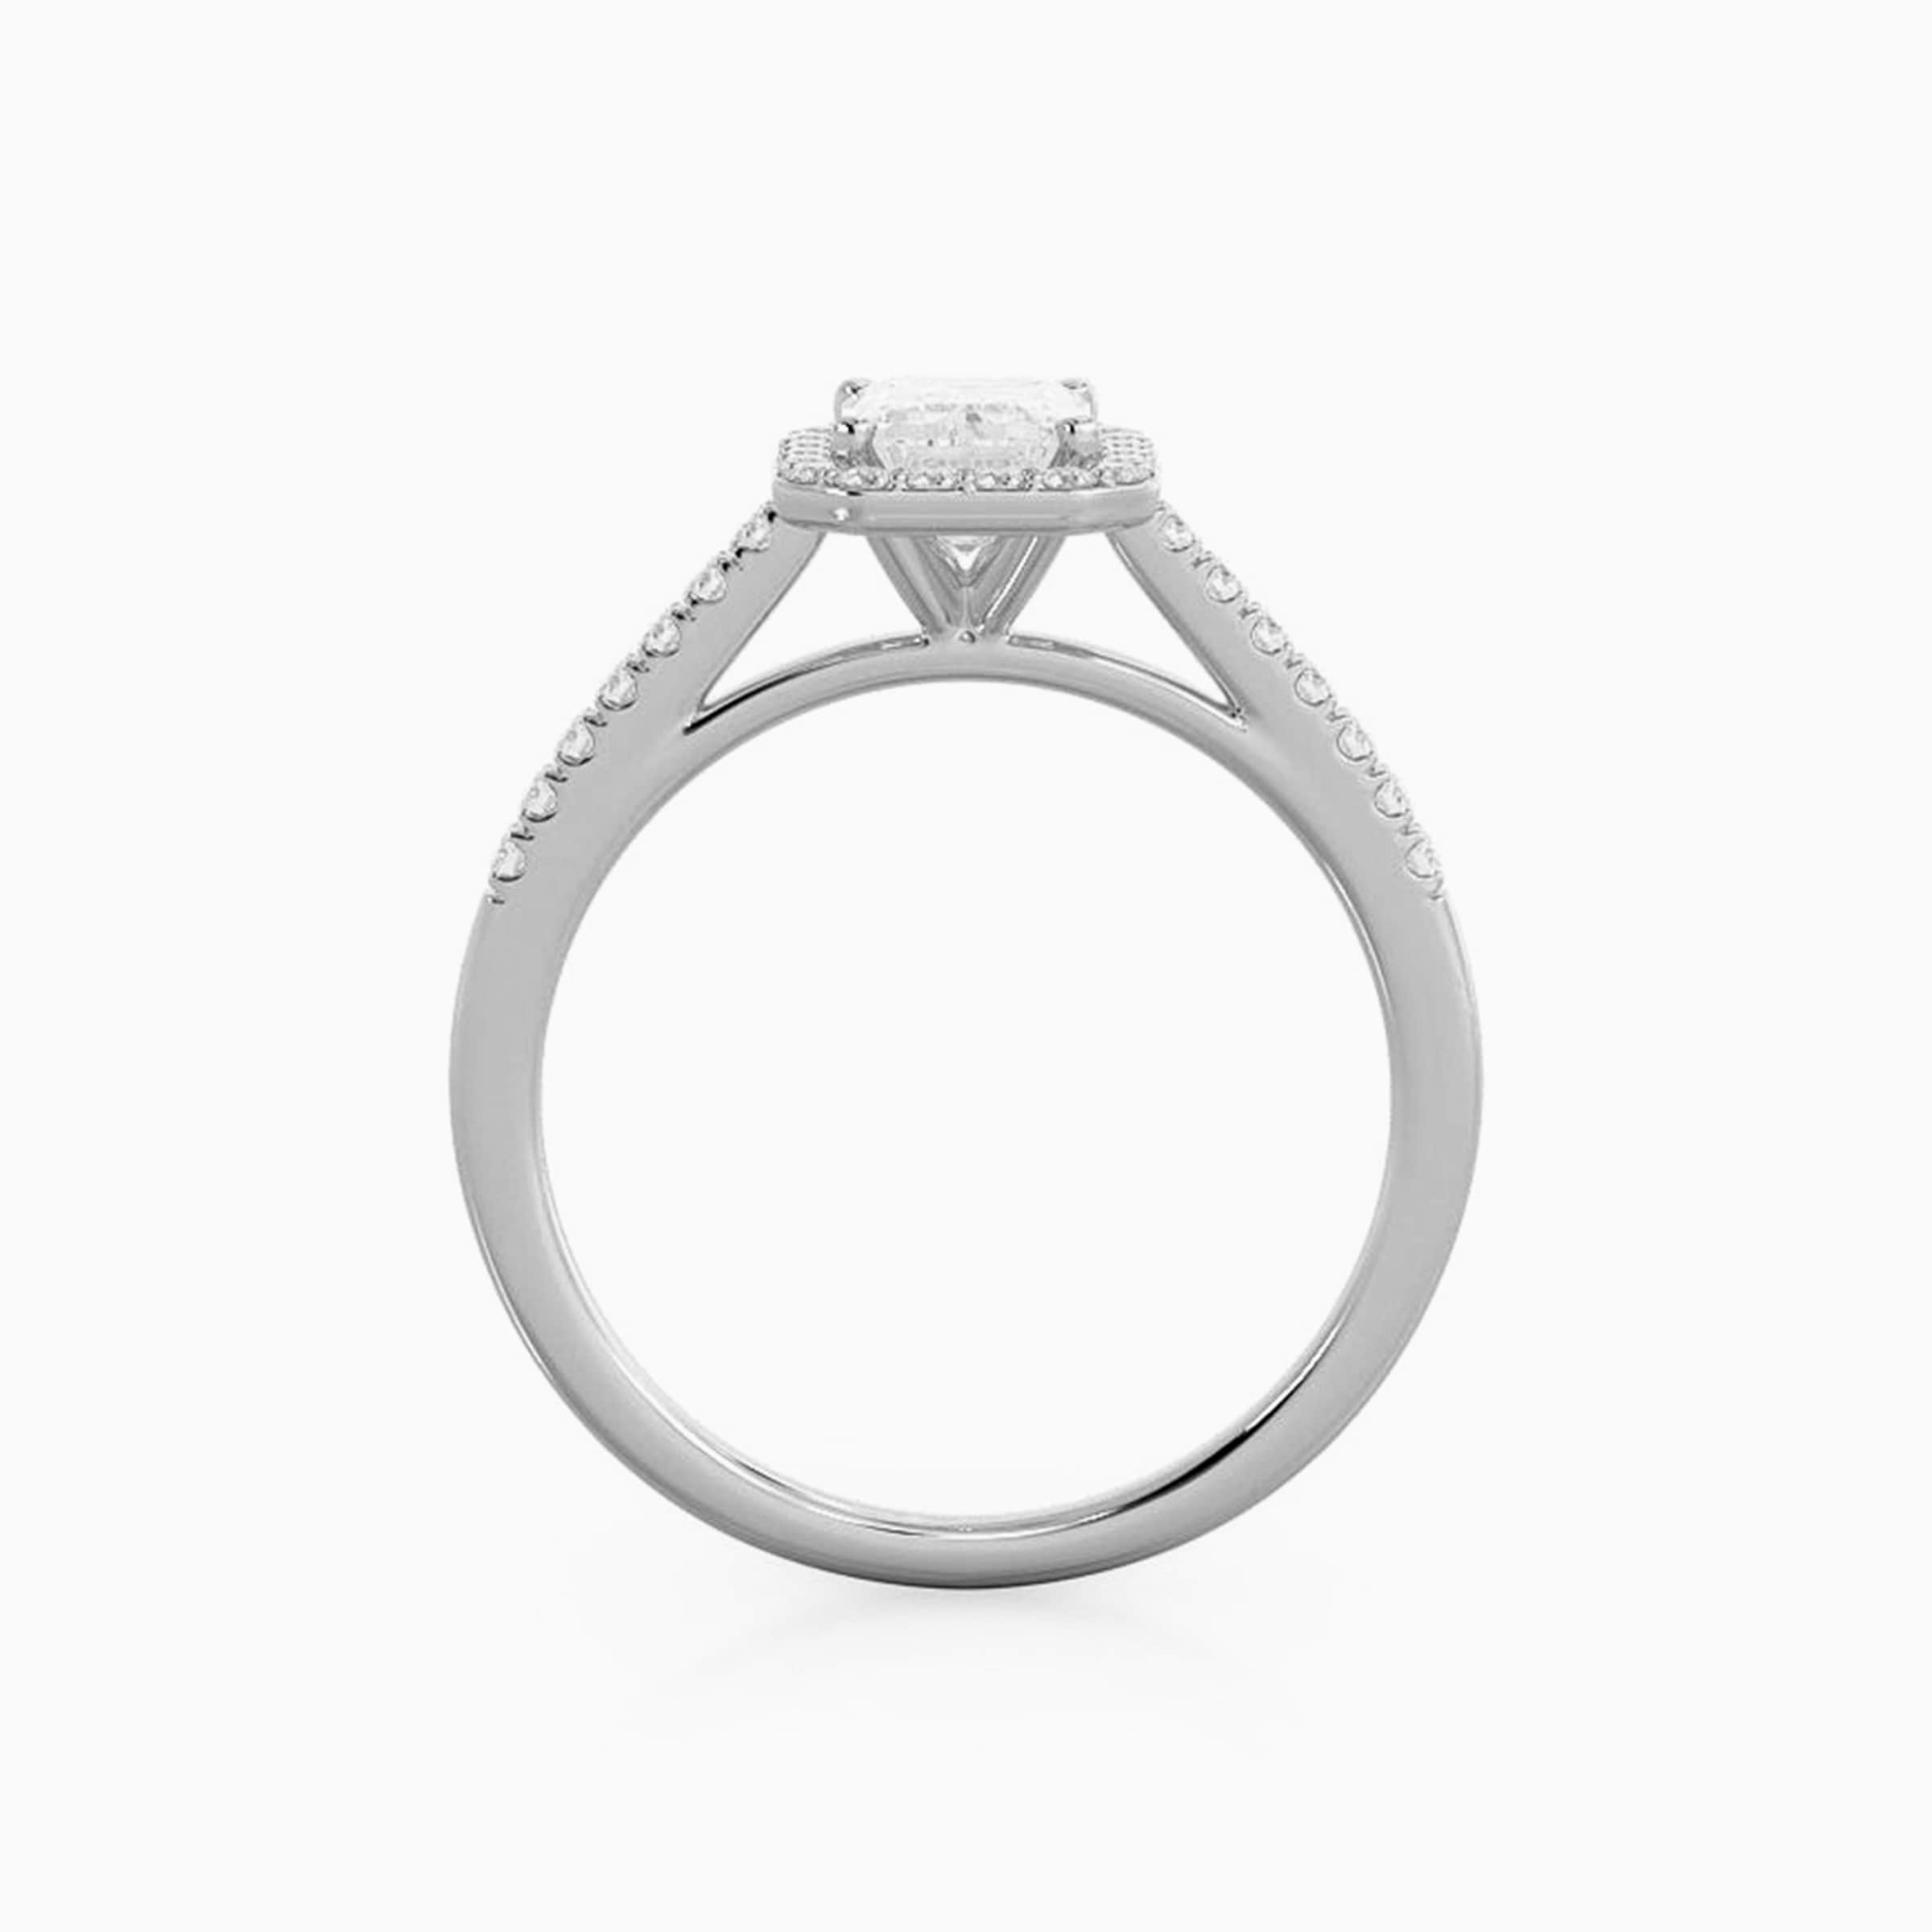 Darry Ring emerald cut halo engagement ring in white gold